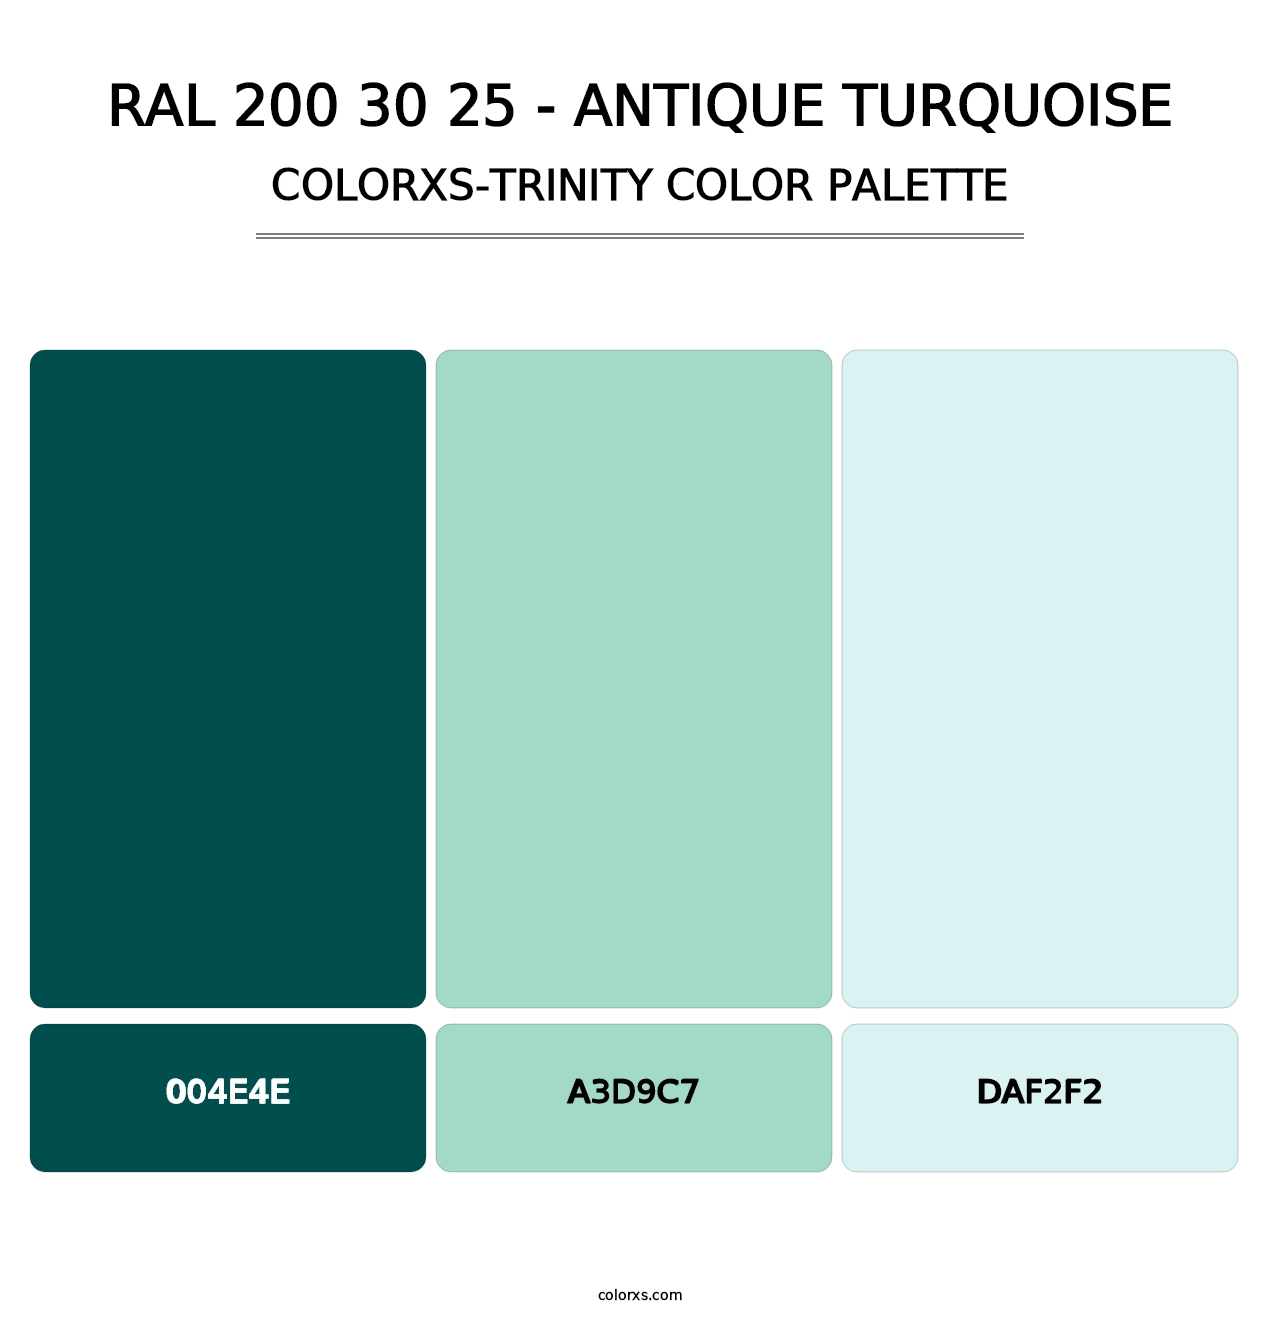 RAL 200 30 25 - Antique Turquoise - Colorxs Trinity Palette